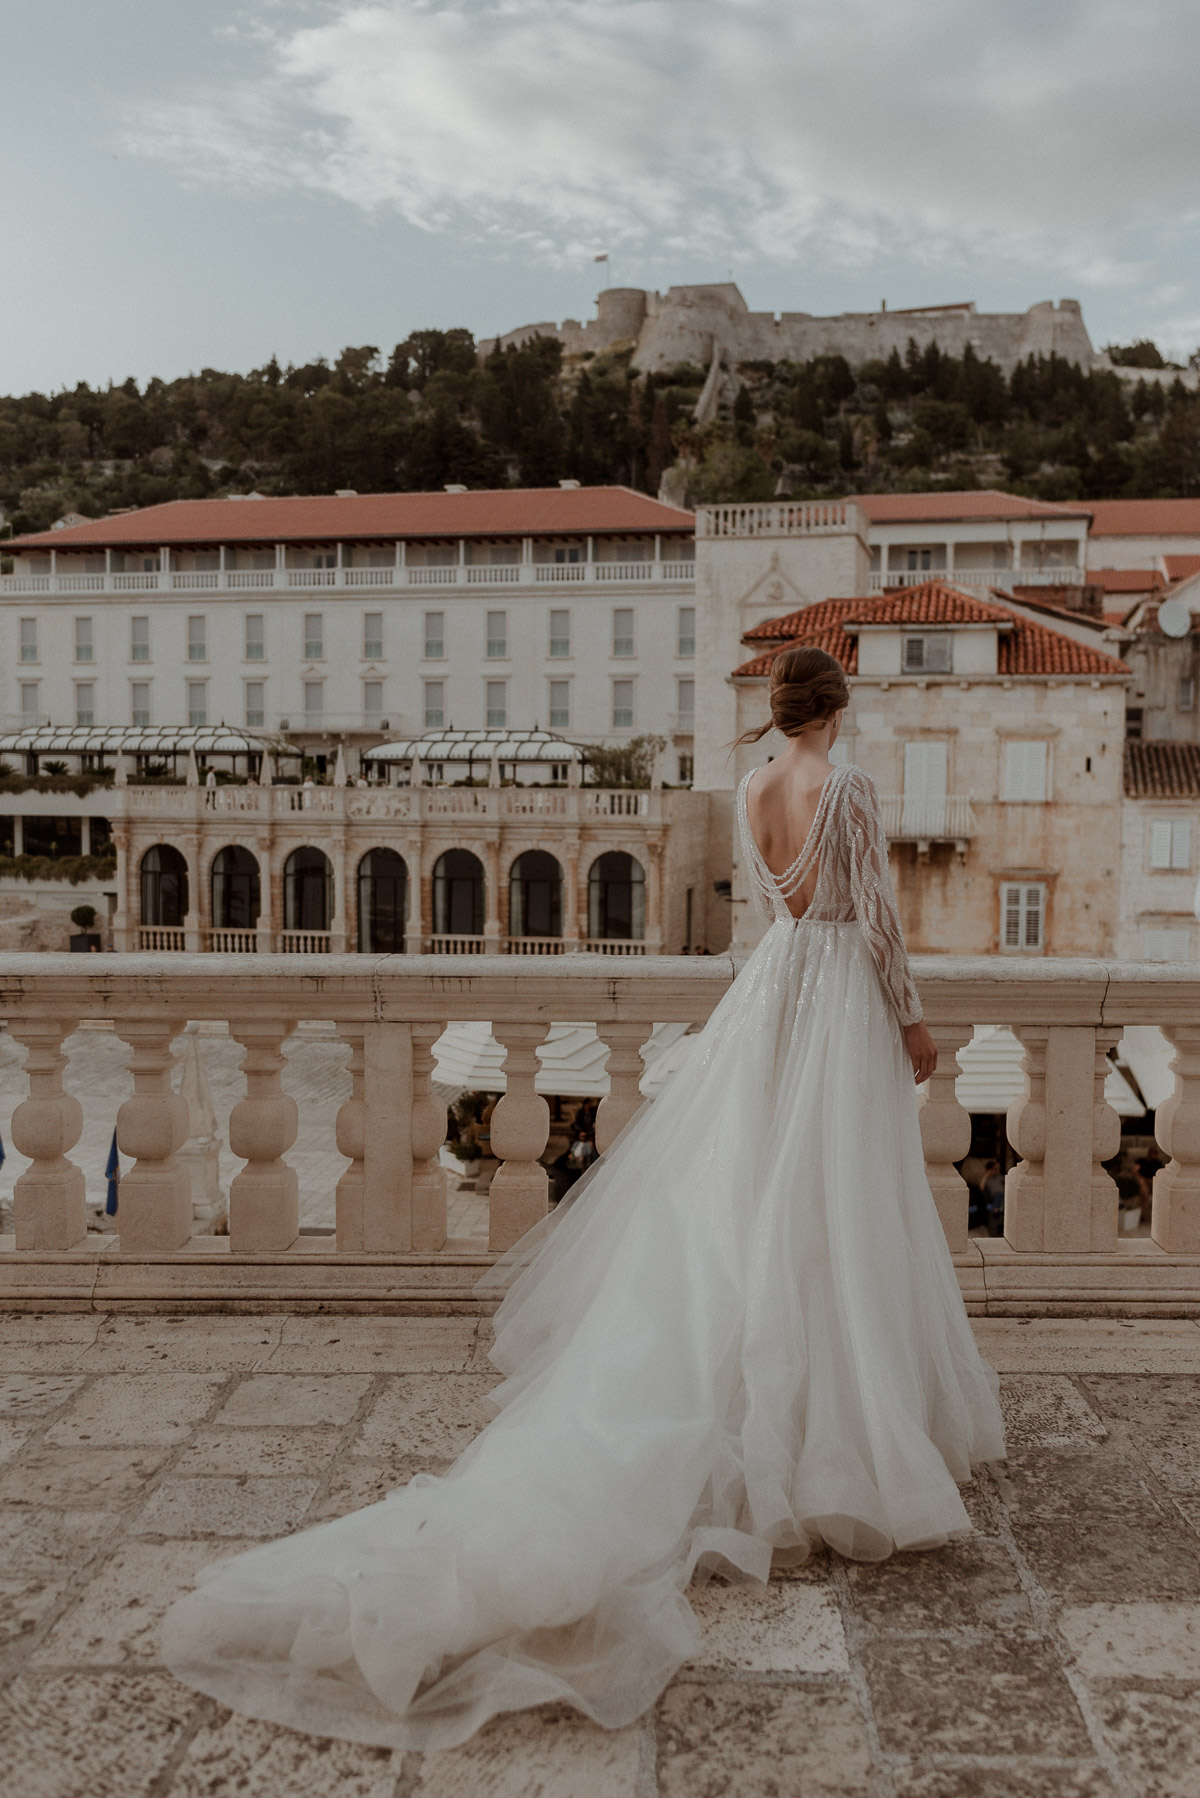 Could Croatia Be The New Destination Wedding Capitol Of The World?